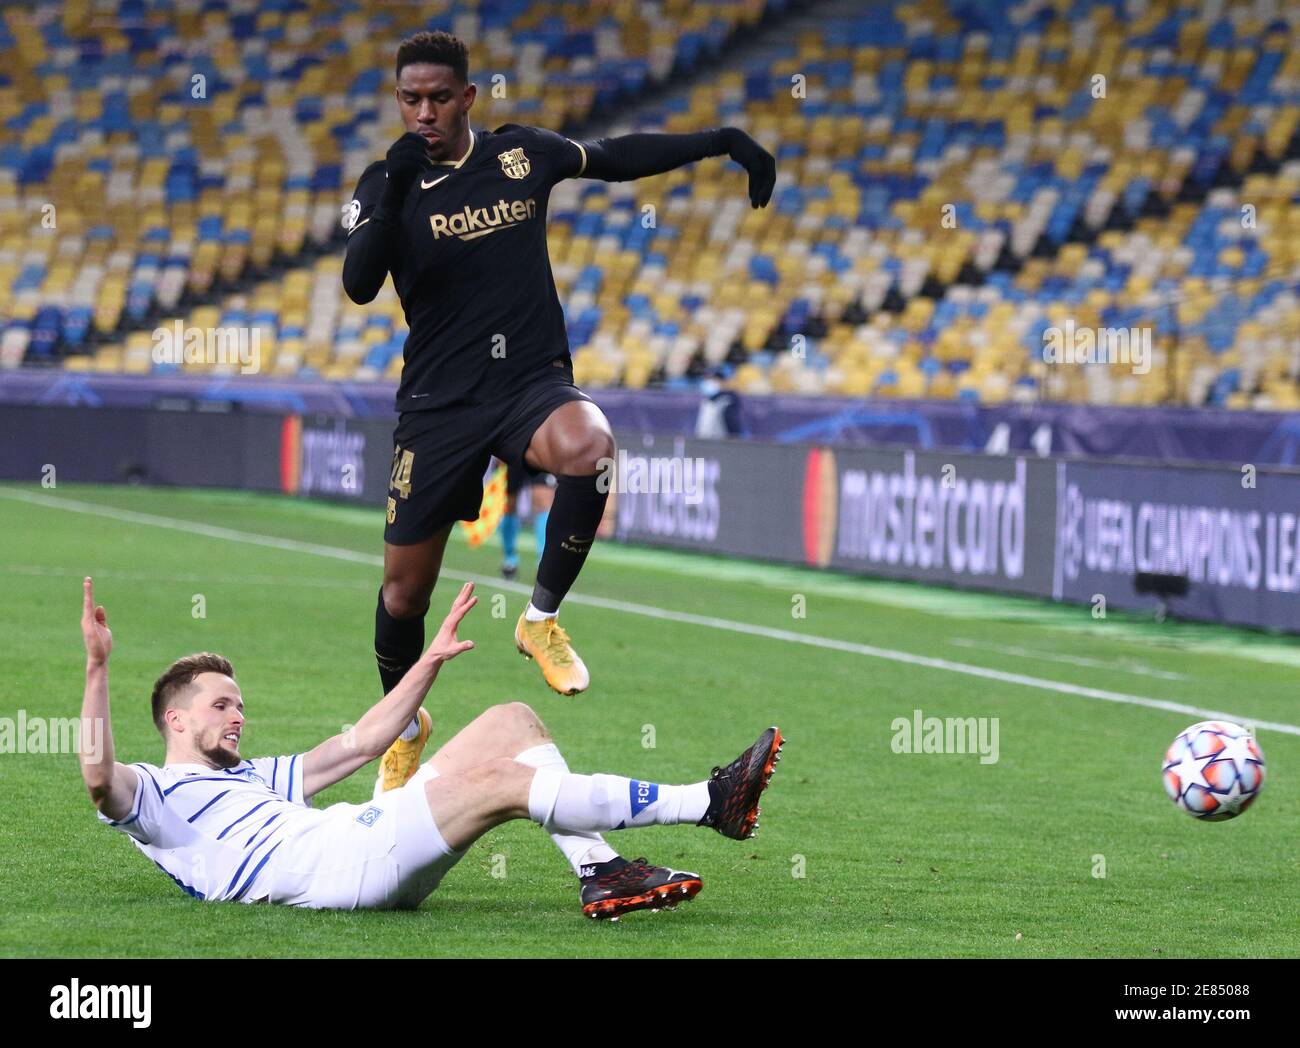 KYIV, UKRAINE - NOVEMBER 24, 2020: Tomasz Kedziora of Dynamo Kyiv (L) fights for a ball with Junior Firpo of Barcelona during their UEFA Champions League game at NSC Olimpiyskyi stadium in Kyiv Stock Photo